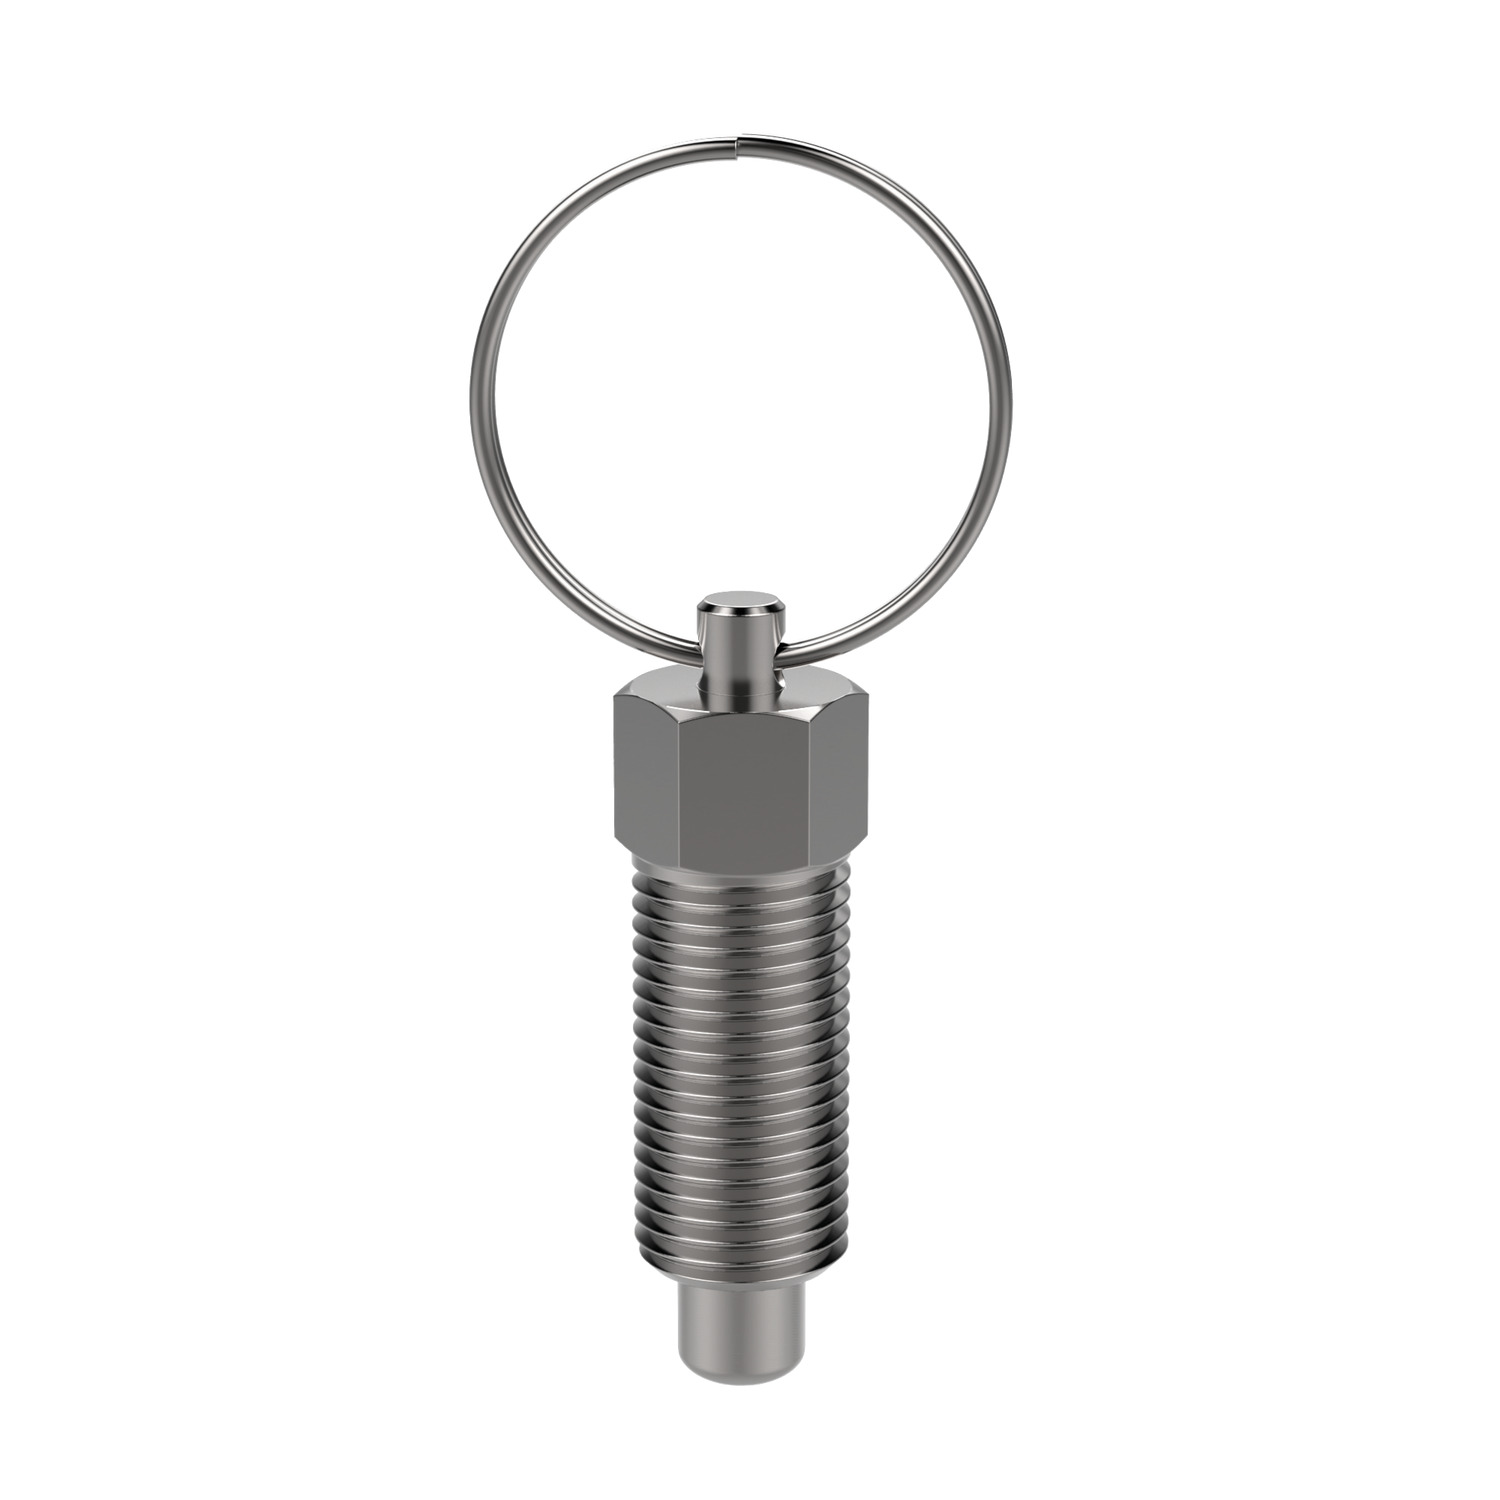 Product 32550, Index Plungers - Pull Ring non-locking - coarse thread / 